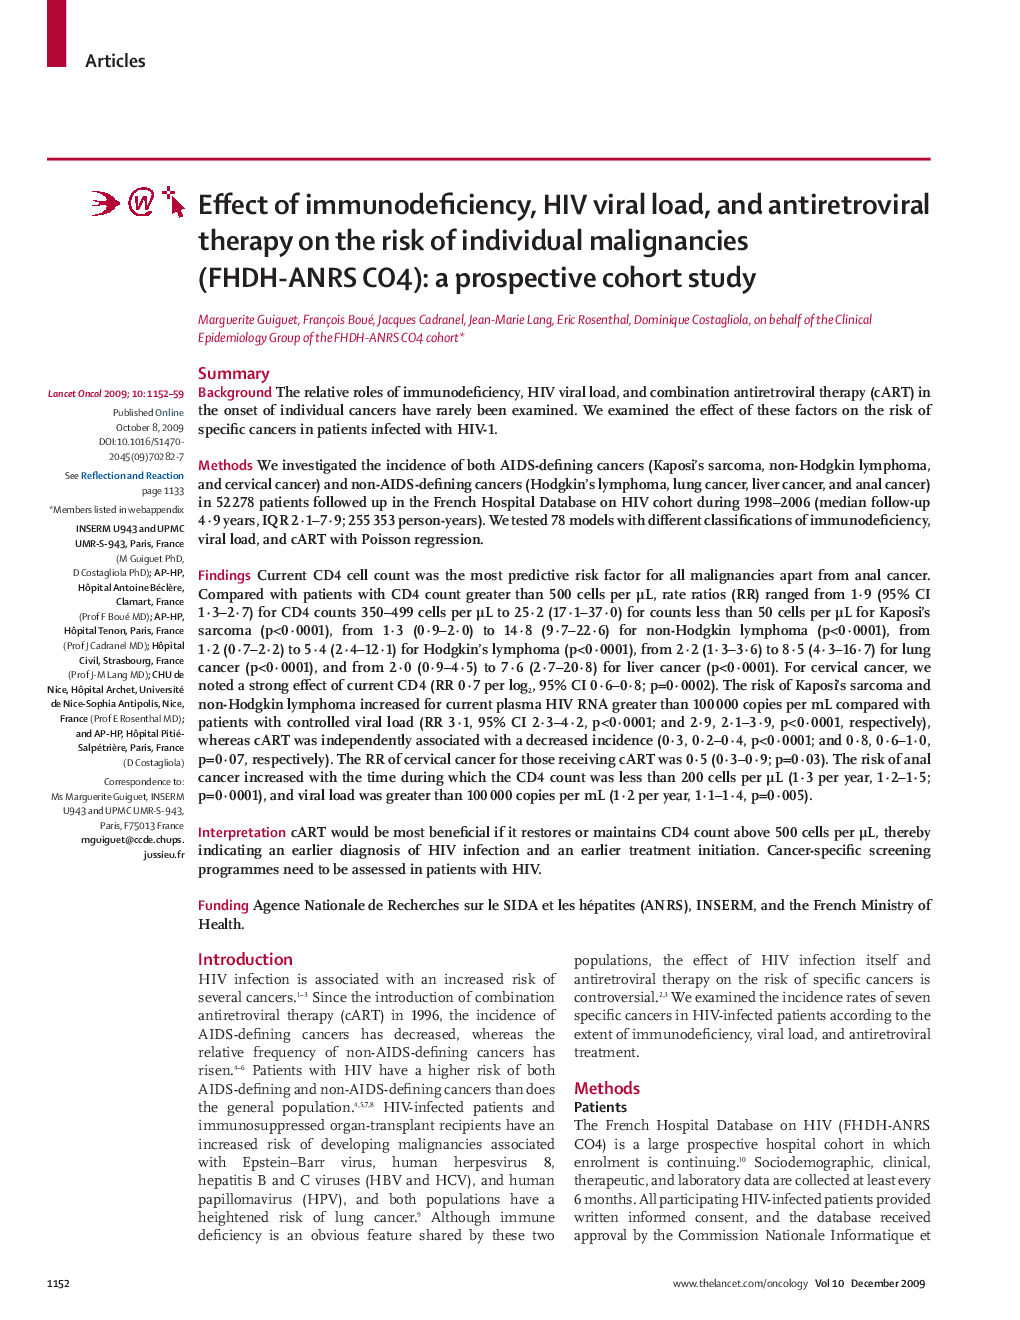 Effect of immunodeficiency, HIV viral load, and antiretroviral therapy on the risk of individual malignancies (FHDH-ANRS CO4): a prospective cohort study